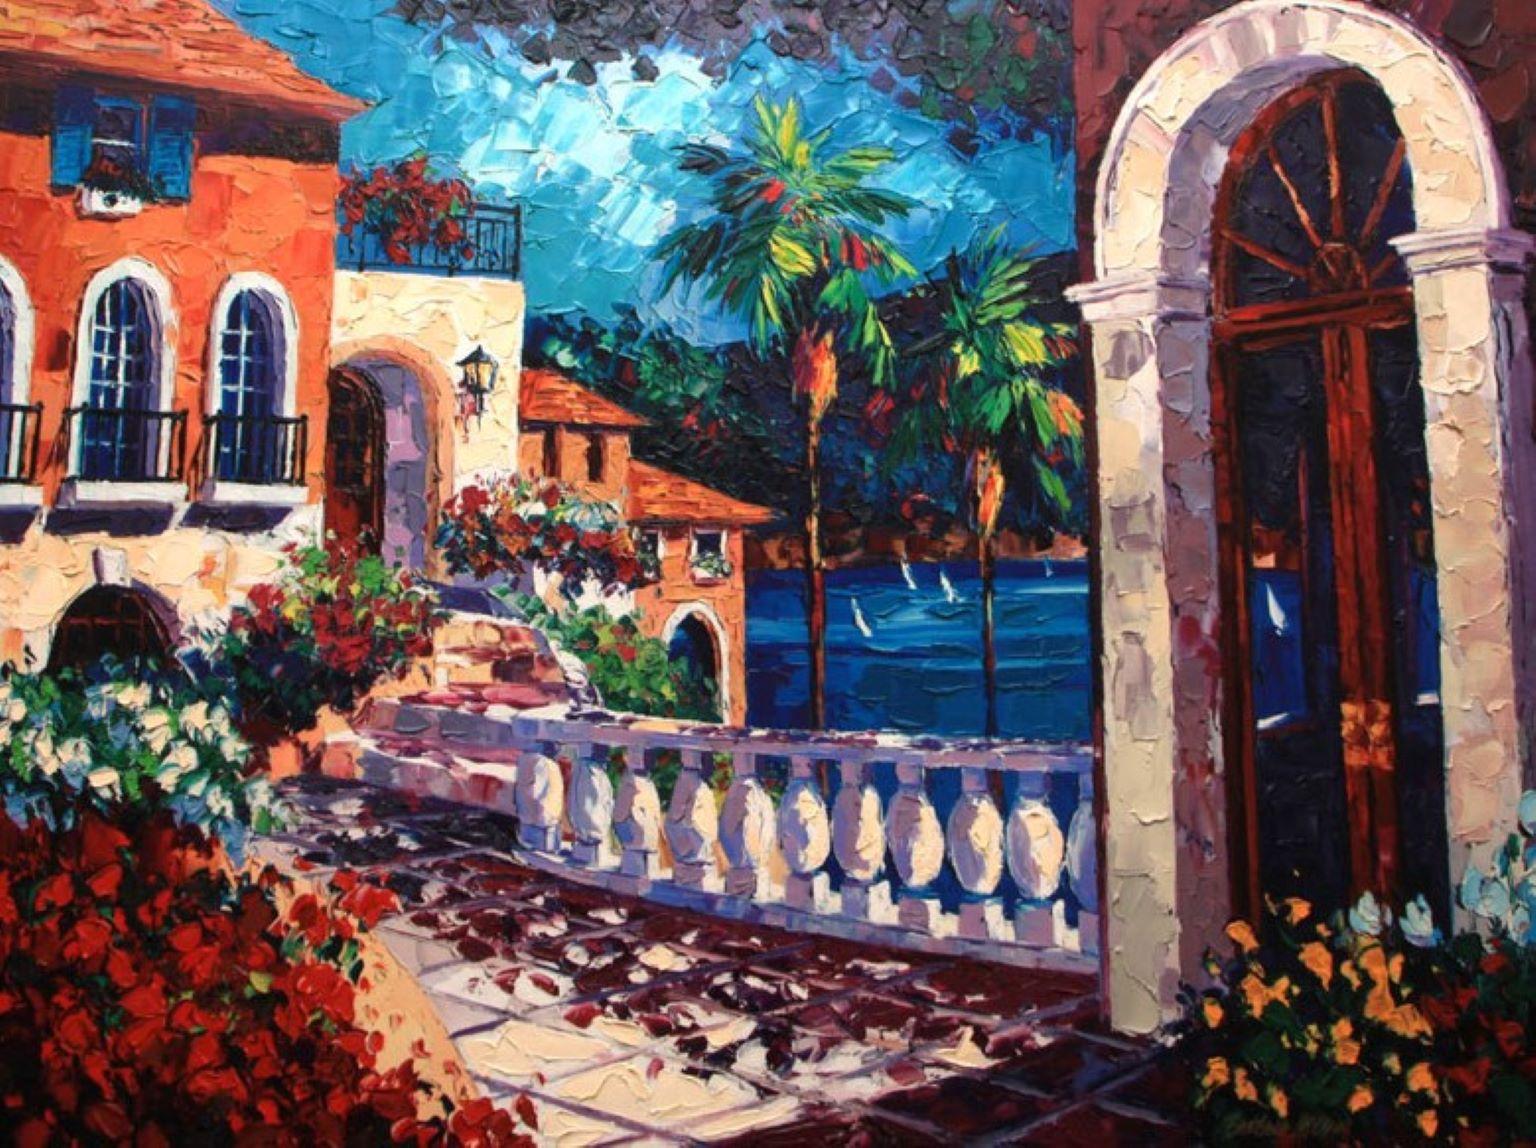 Barbara McCann Landscape Painting - "French Riviera" Limited Edition Embellished Giclee on Canvas, comes with COA